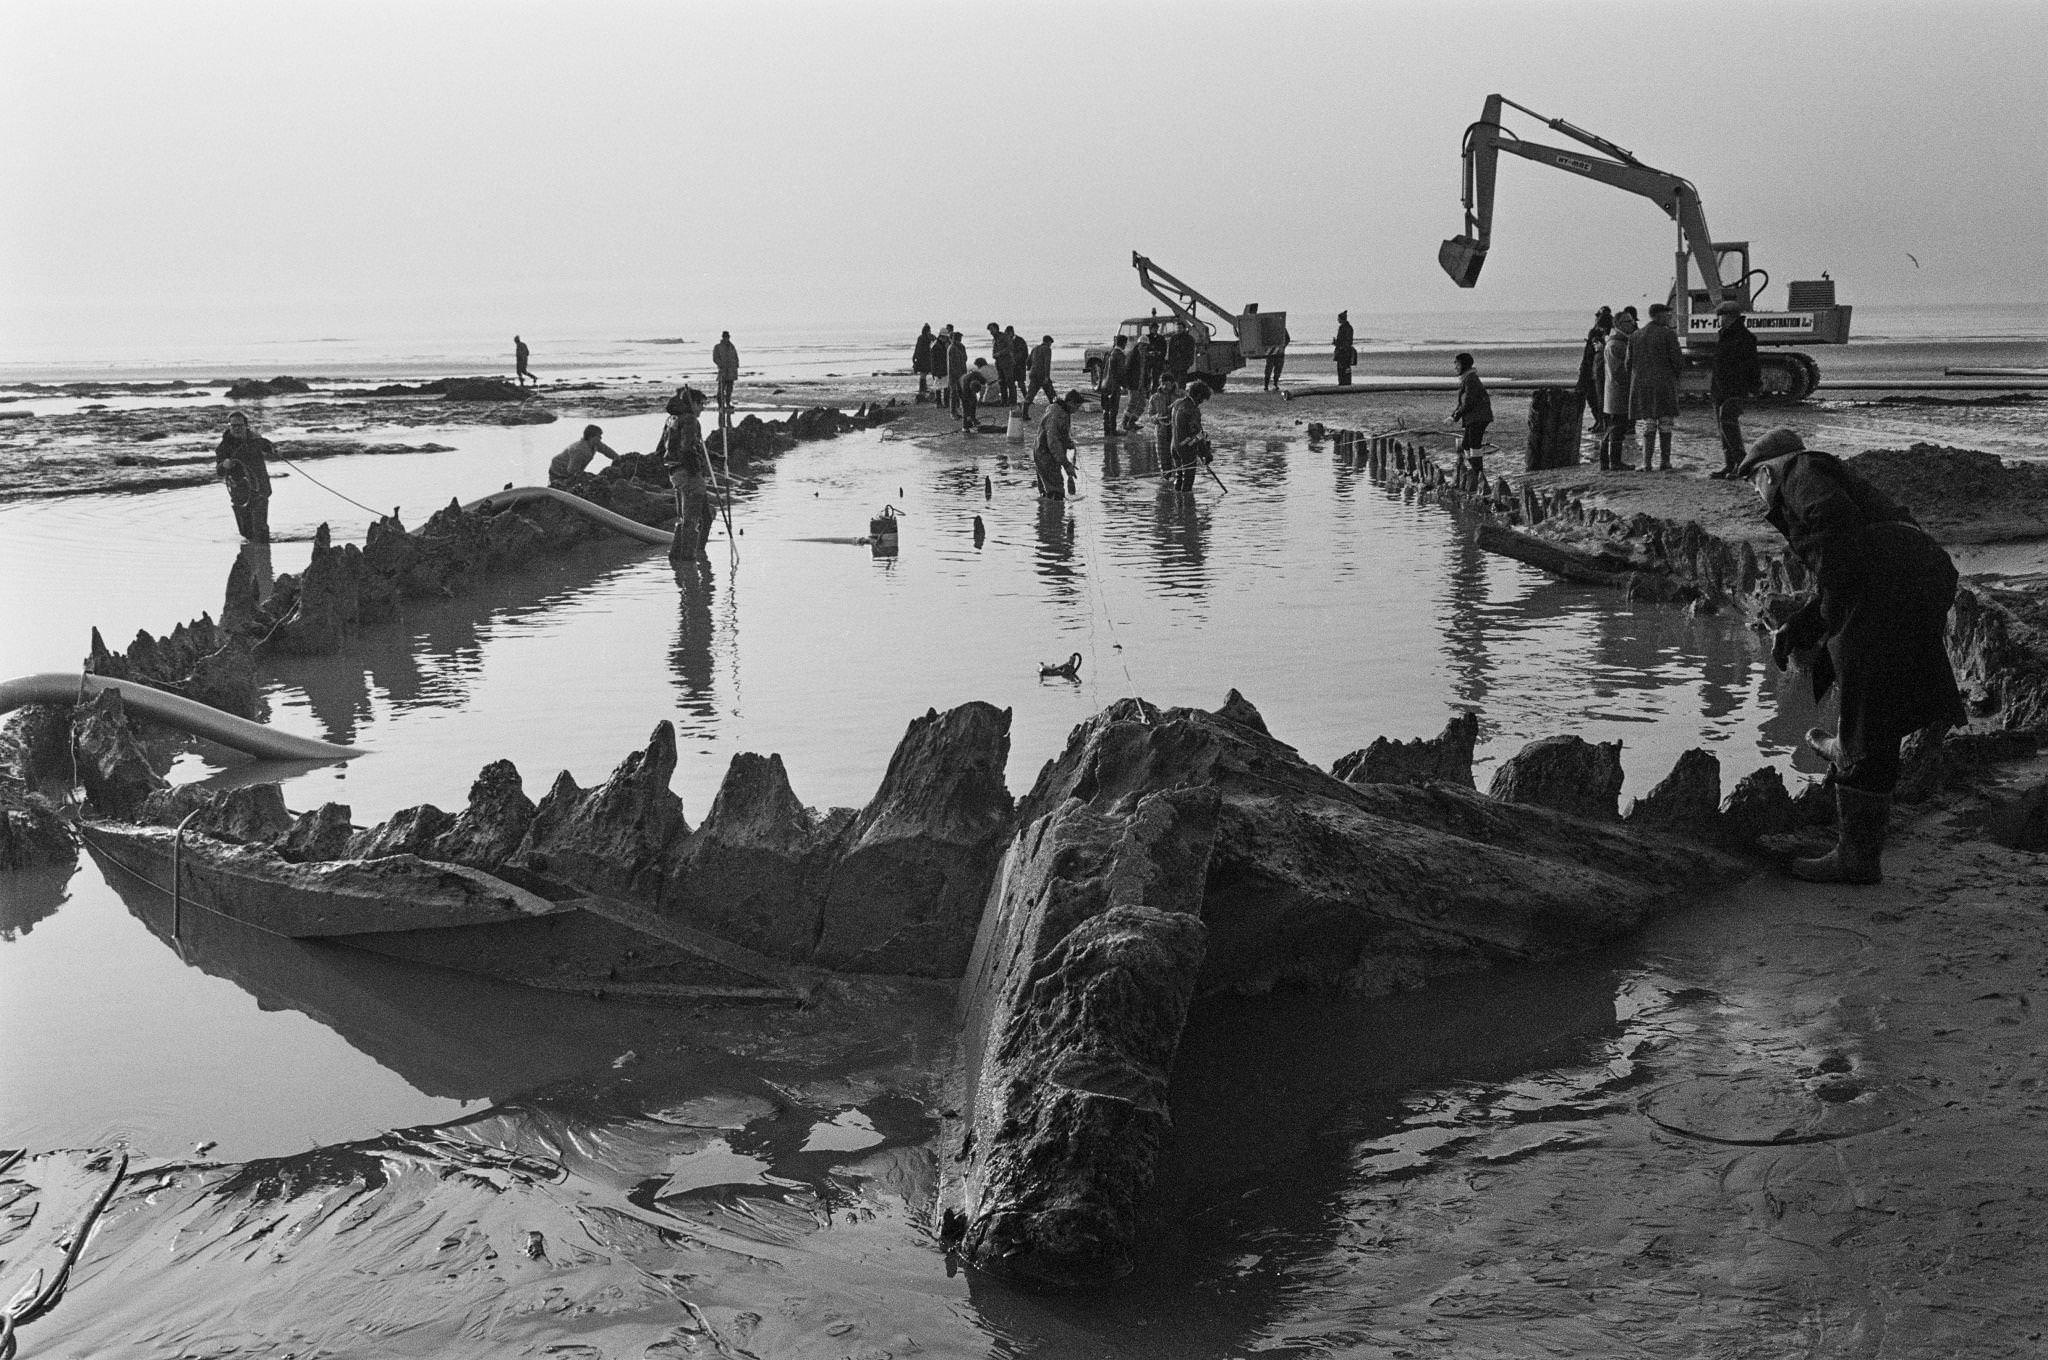 The 'Amsterdam', an 18th-century cargo ship of the Dutch East India Company, is uncovered in the muddy shore at Bulverhythe, near Hastings in East Sussex - 13th March 1970.